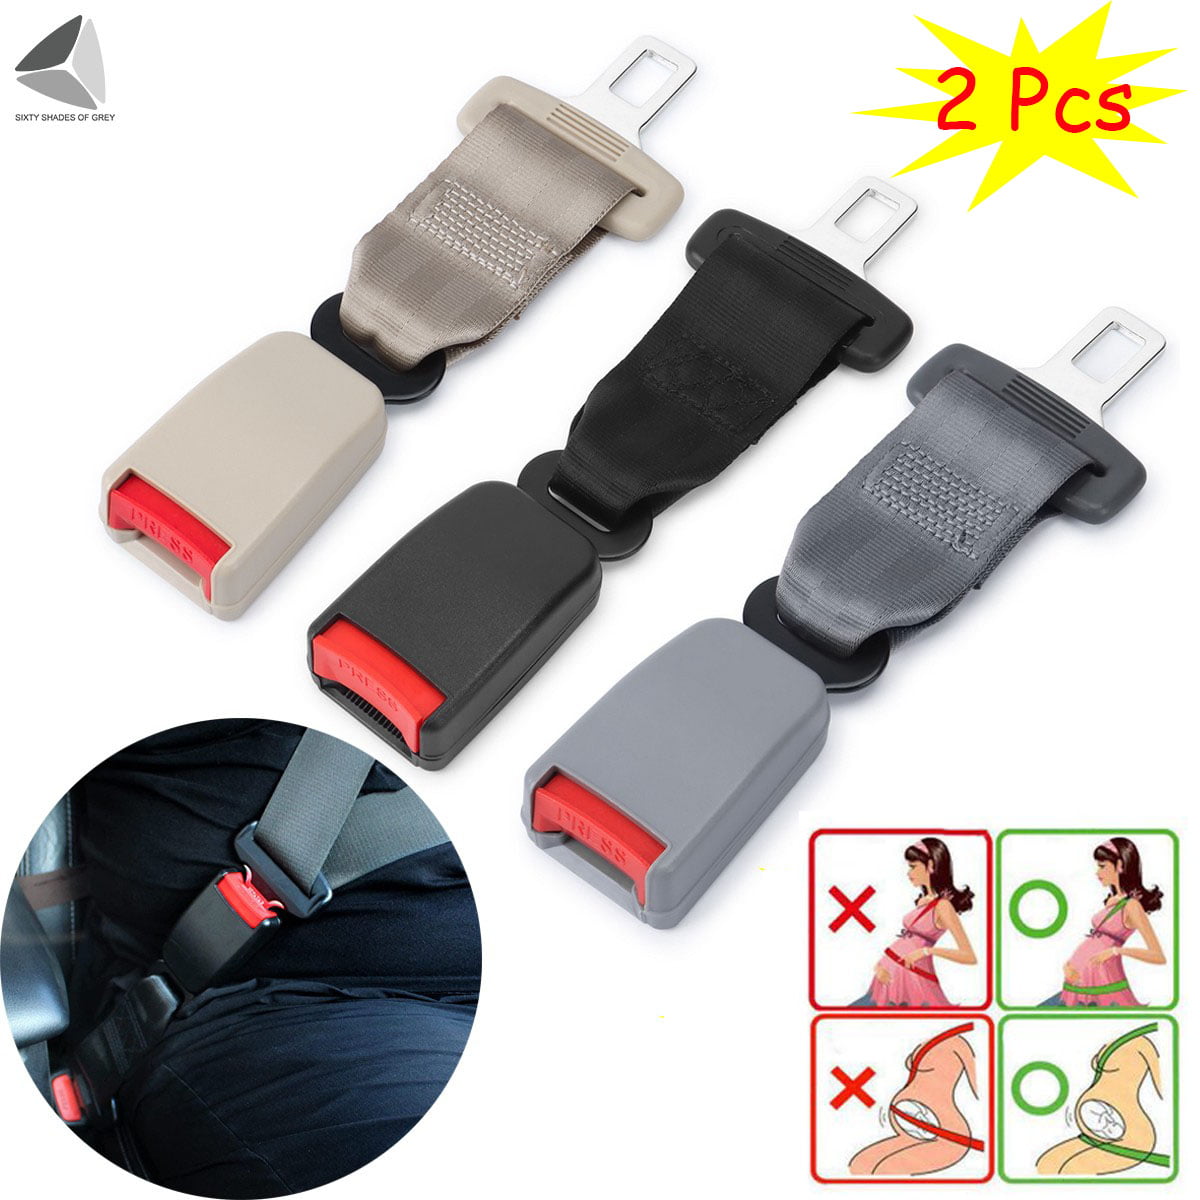 Seatbelt Extenders for Cars 14 Universal Seatbelt Buckle Extender 2 Pack Safety Seat Belt Extension Auto Accessories 